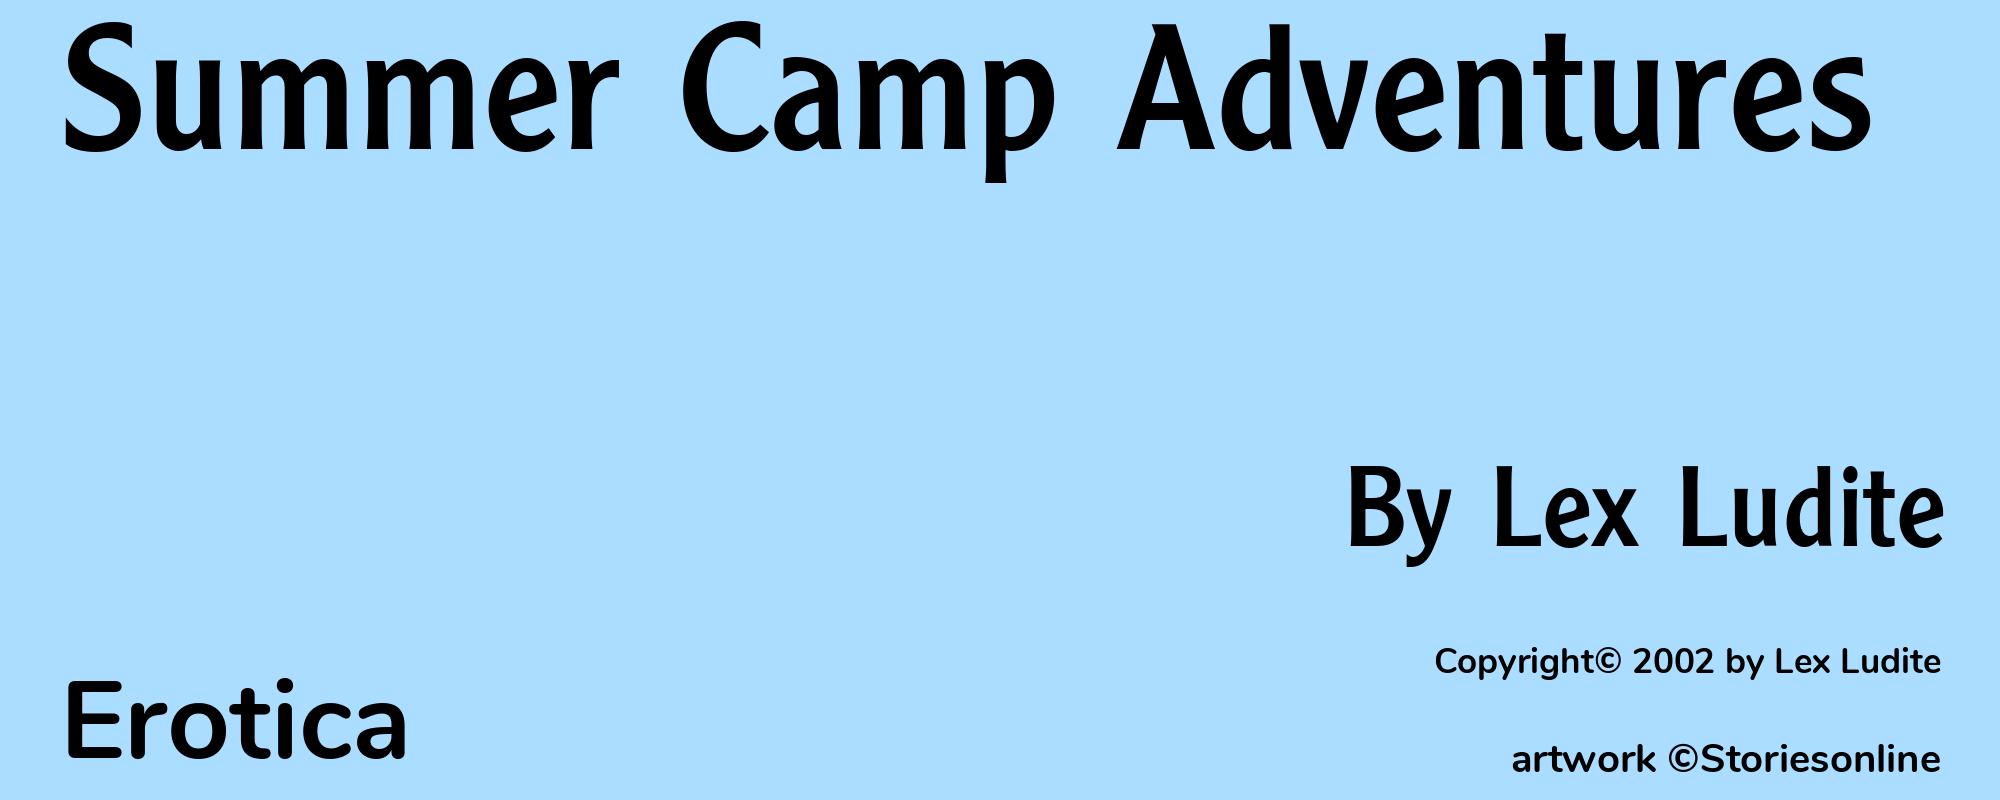 Summer Camp Adventures - Cover